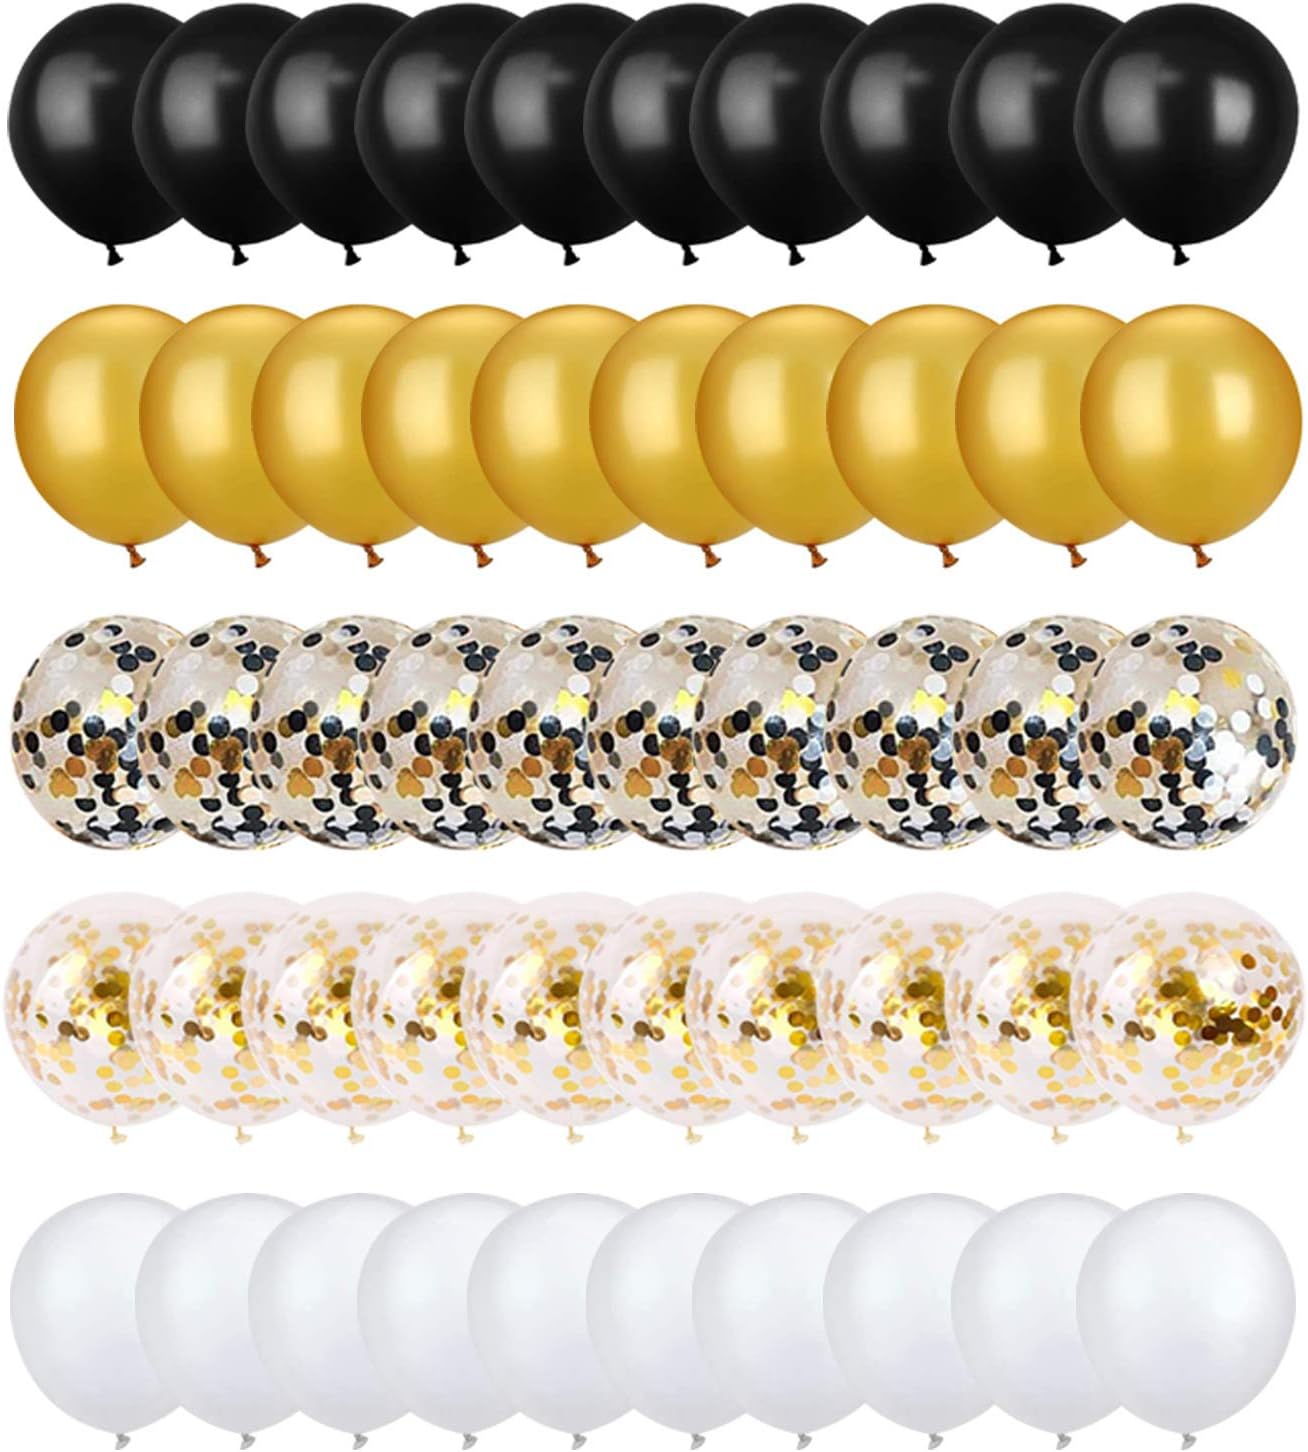 72 Pack Black Gold Confetti Balloons Kit, 12 Inch Black Gold White Balloons and Gold Confetti Balloons with Balloon Ribbons for Graduation Birthday Wedding Baby Shower Party Decorations